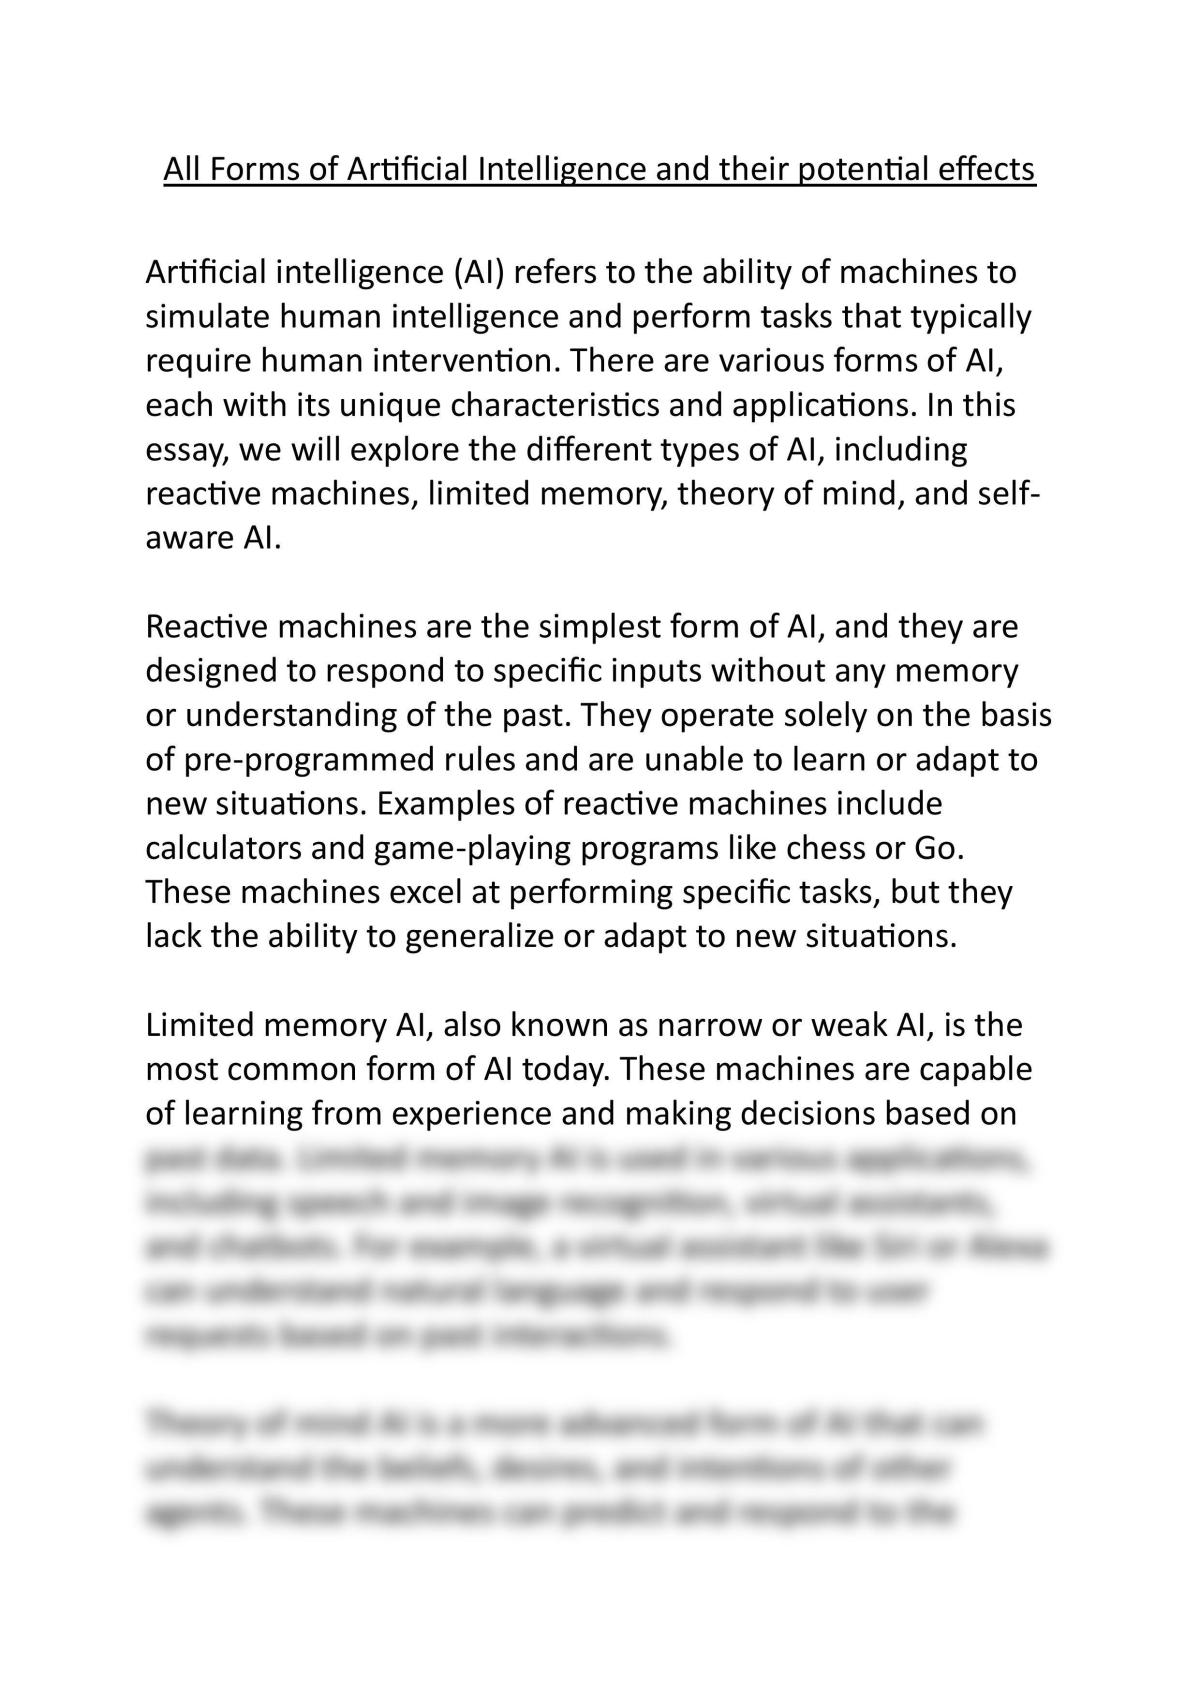 All forms of AI and their potential effects - Page 1